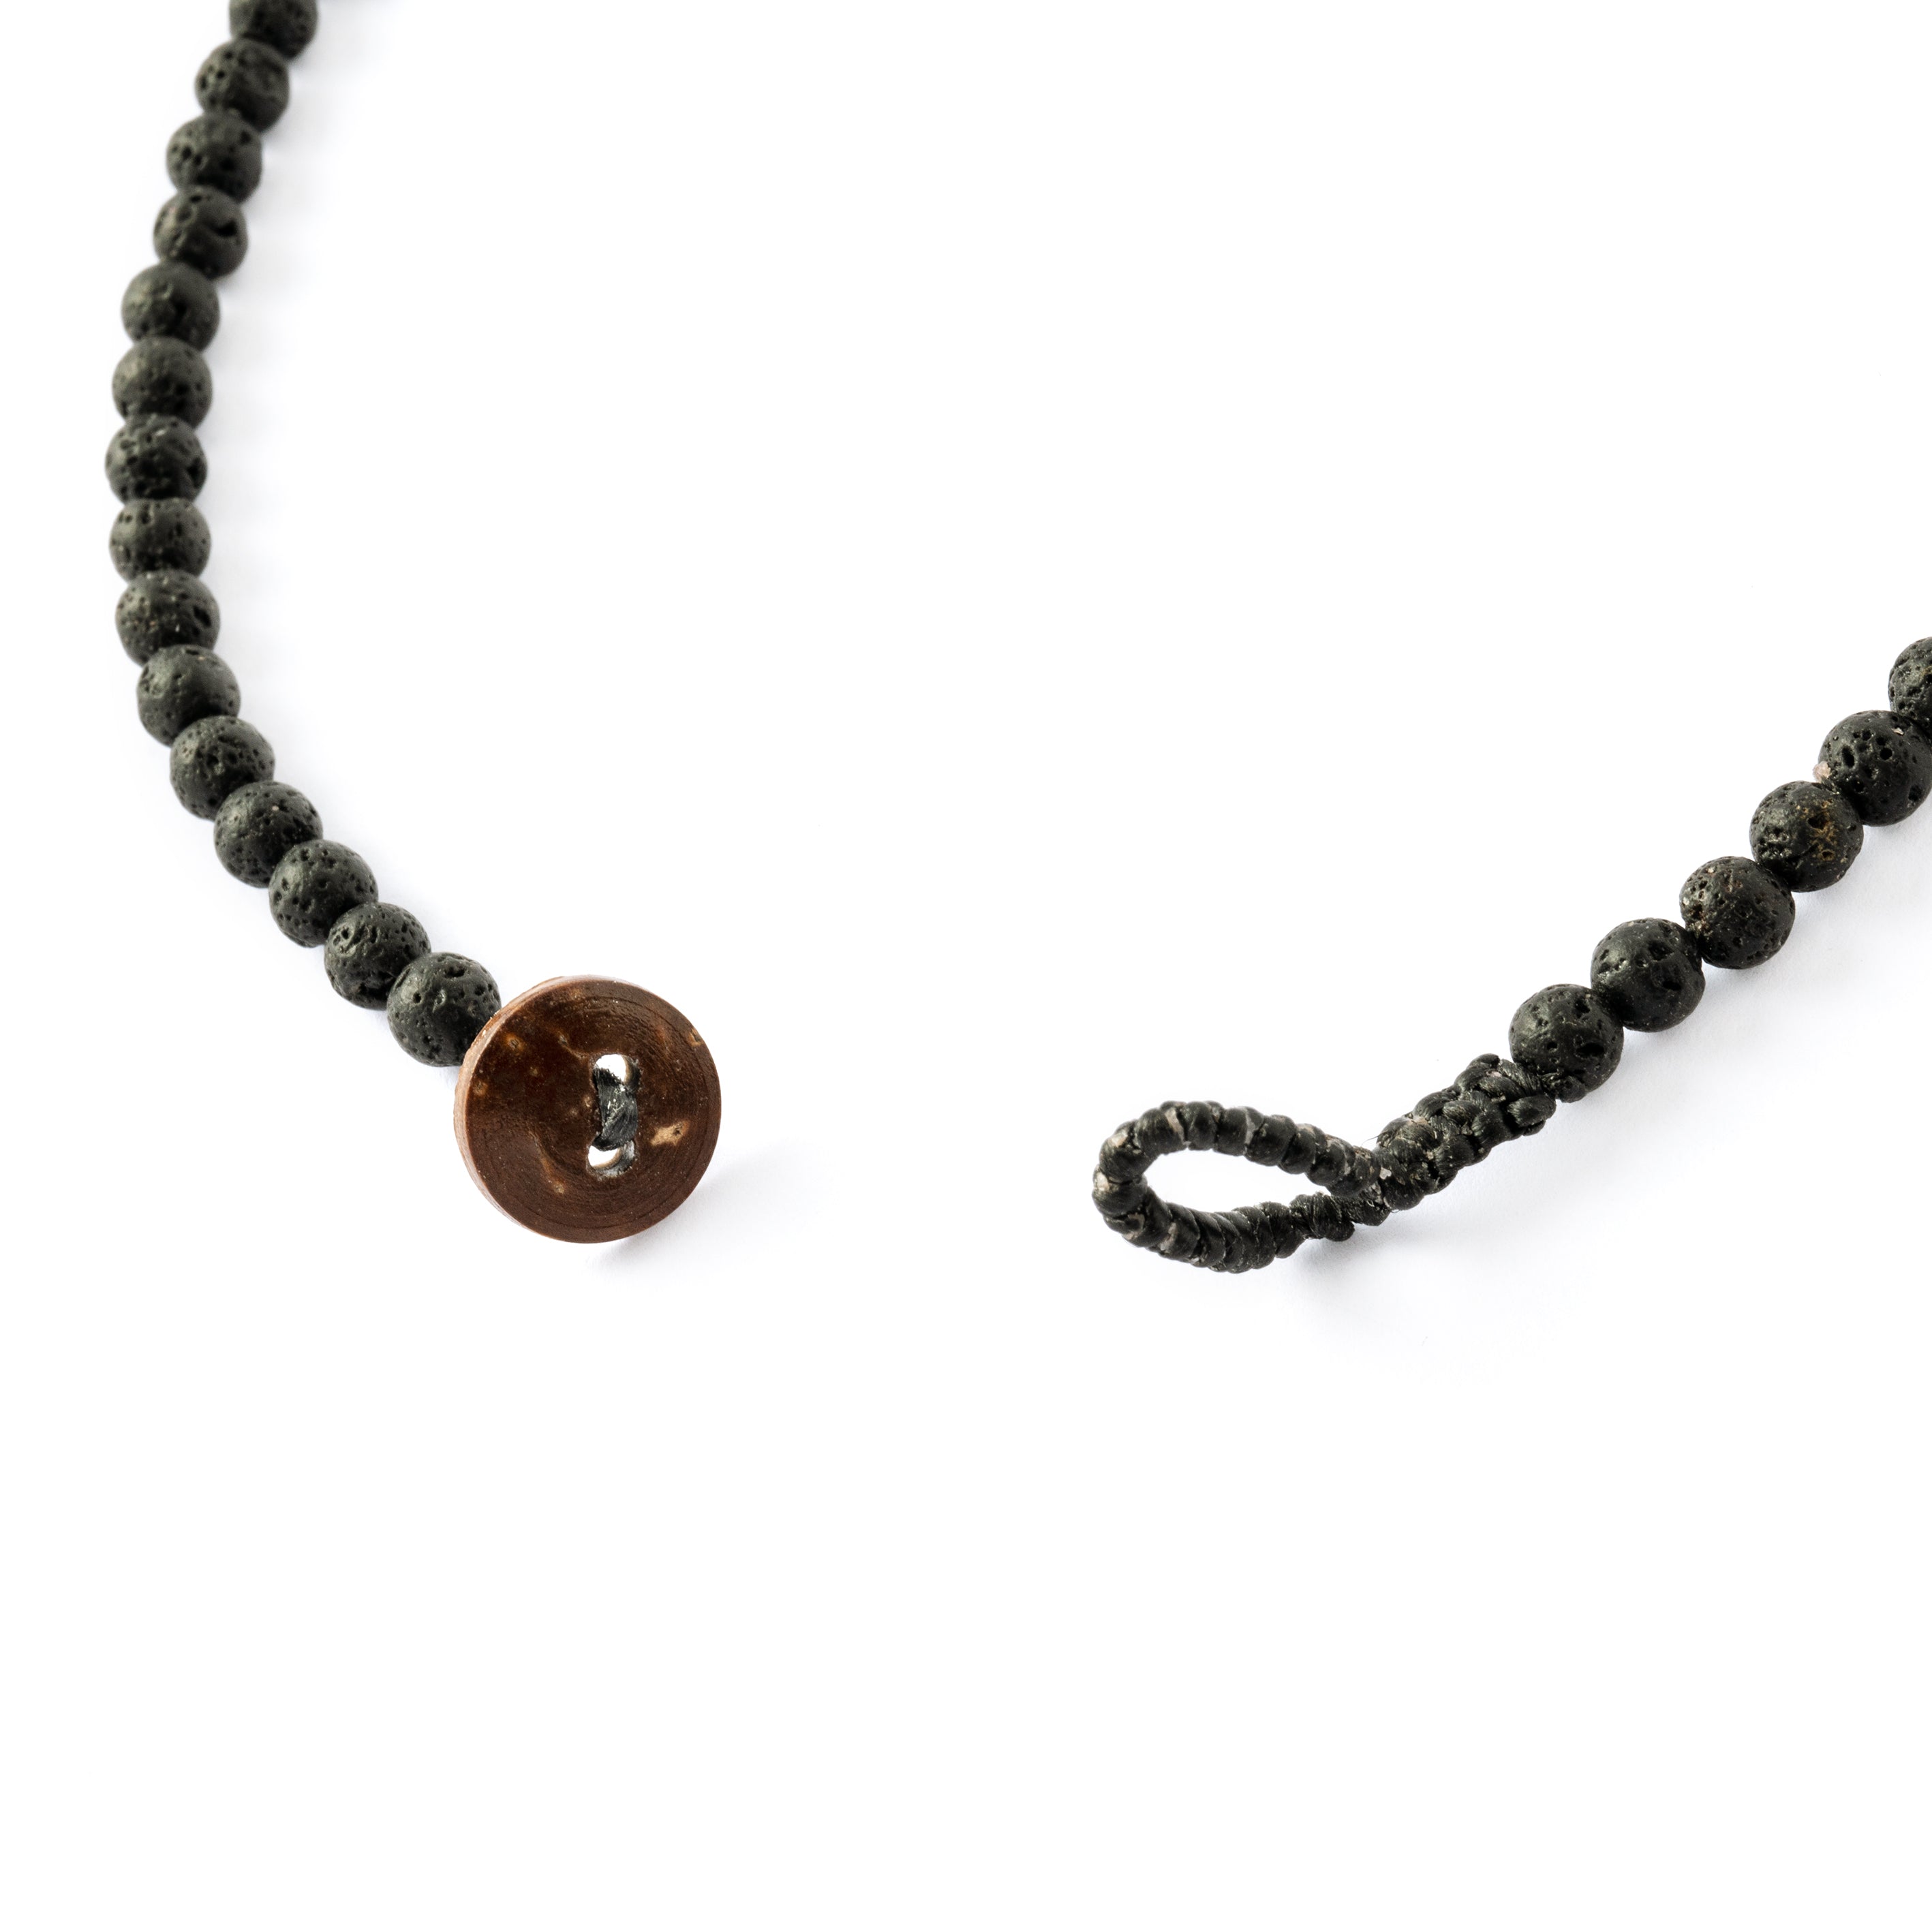 Lava Bead Necklace with Brass open button closure view